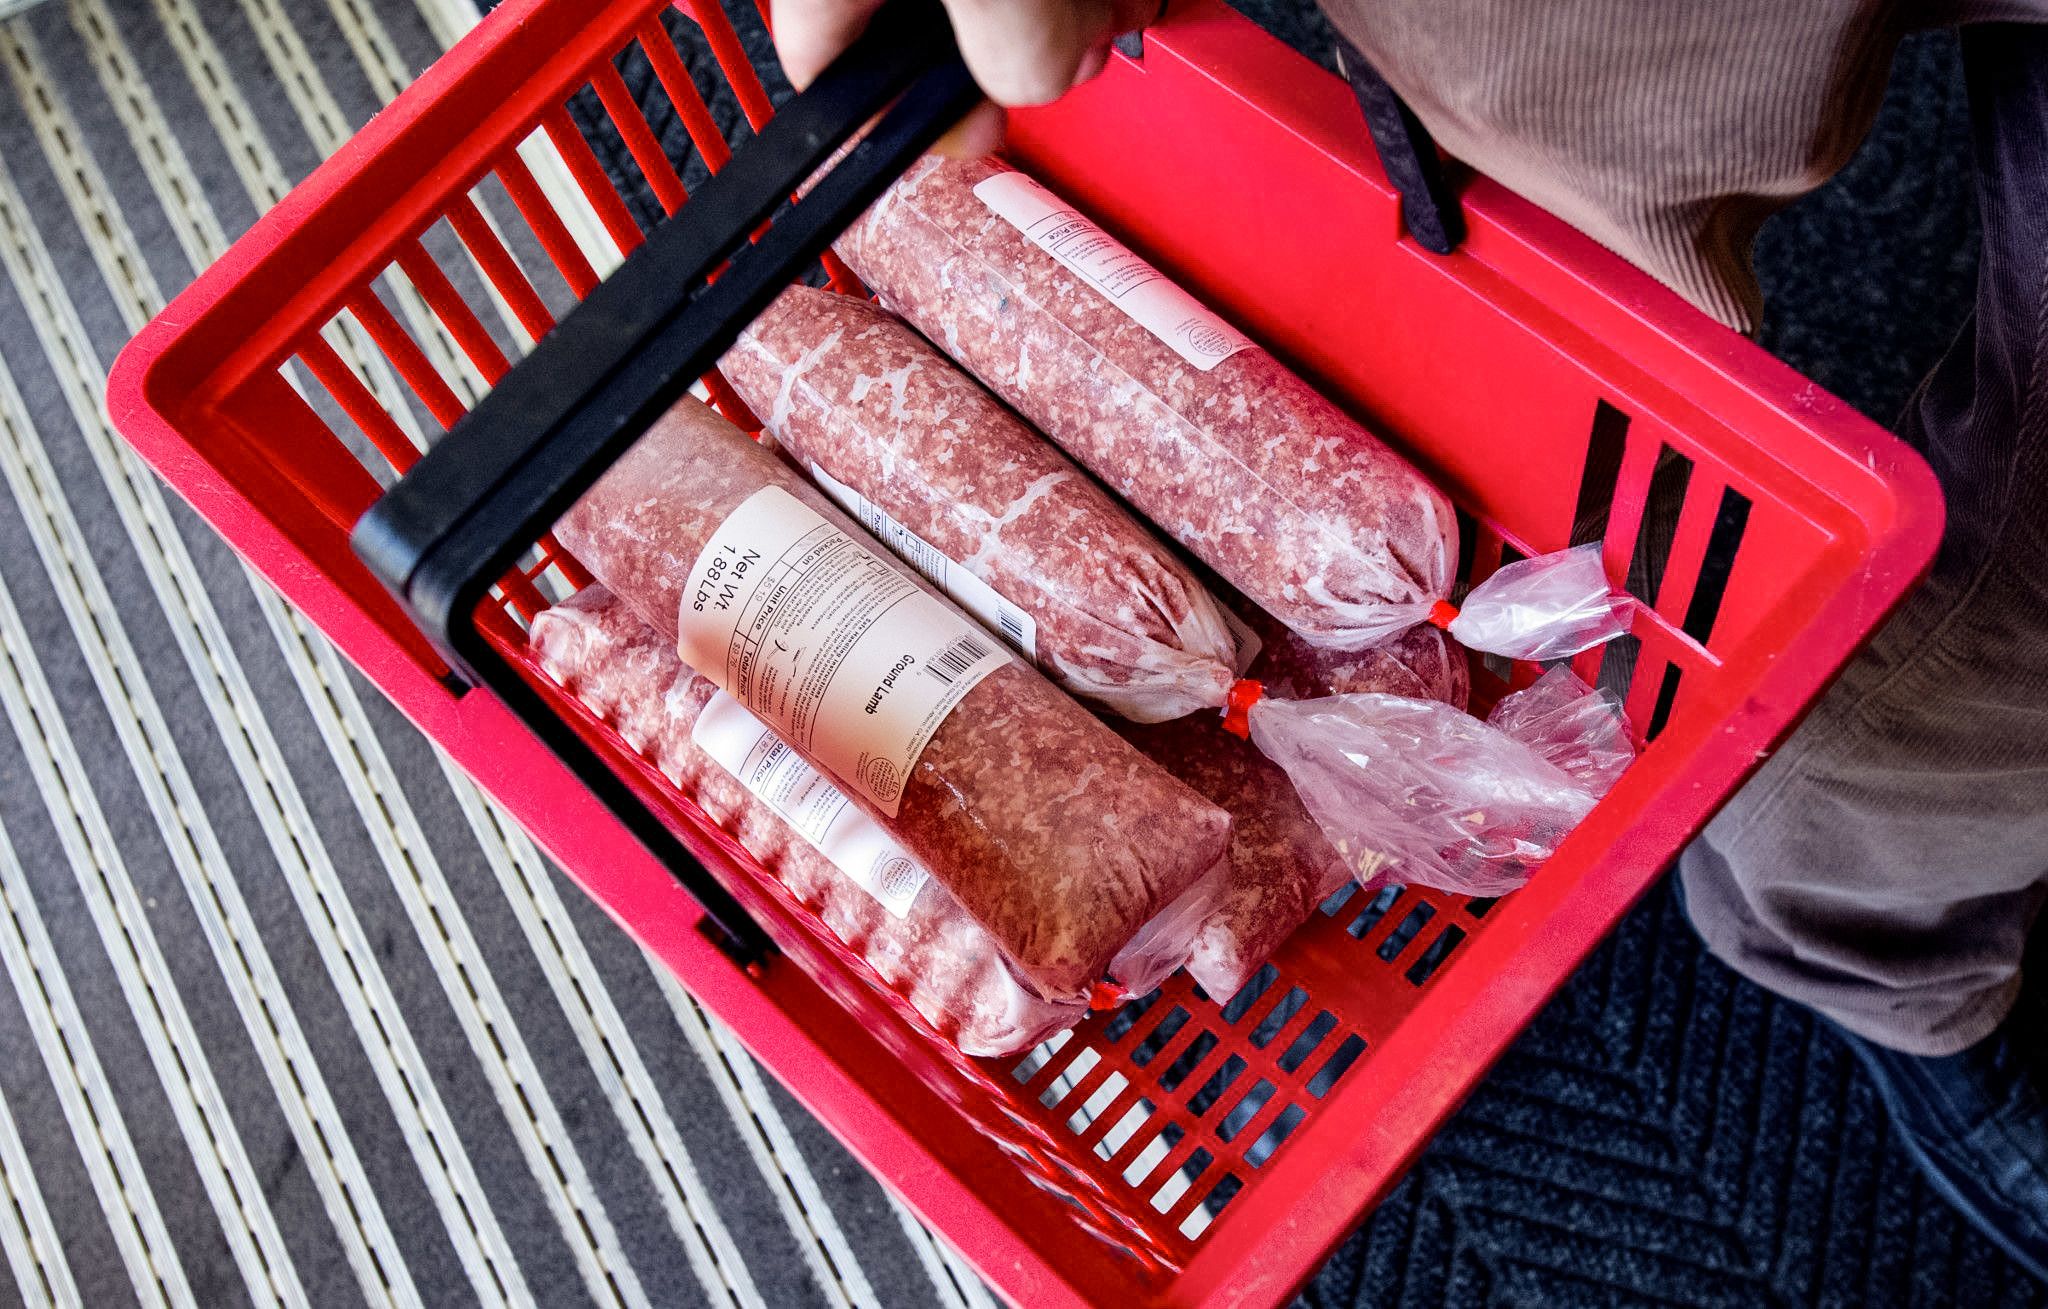 Packages of ground meat inside a red shopping basket.